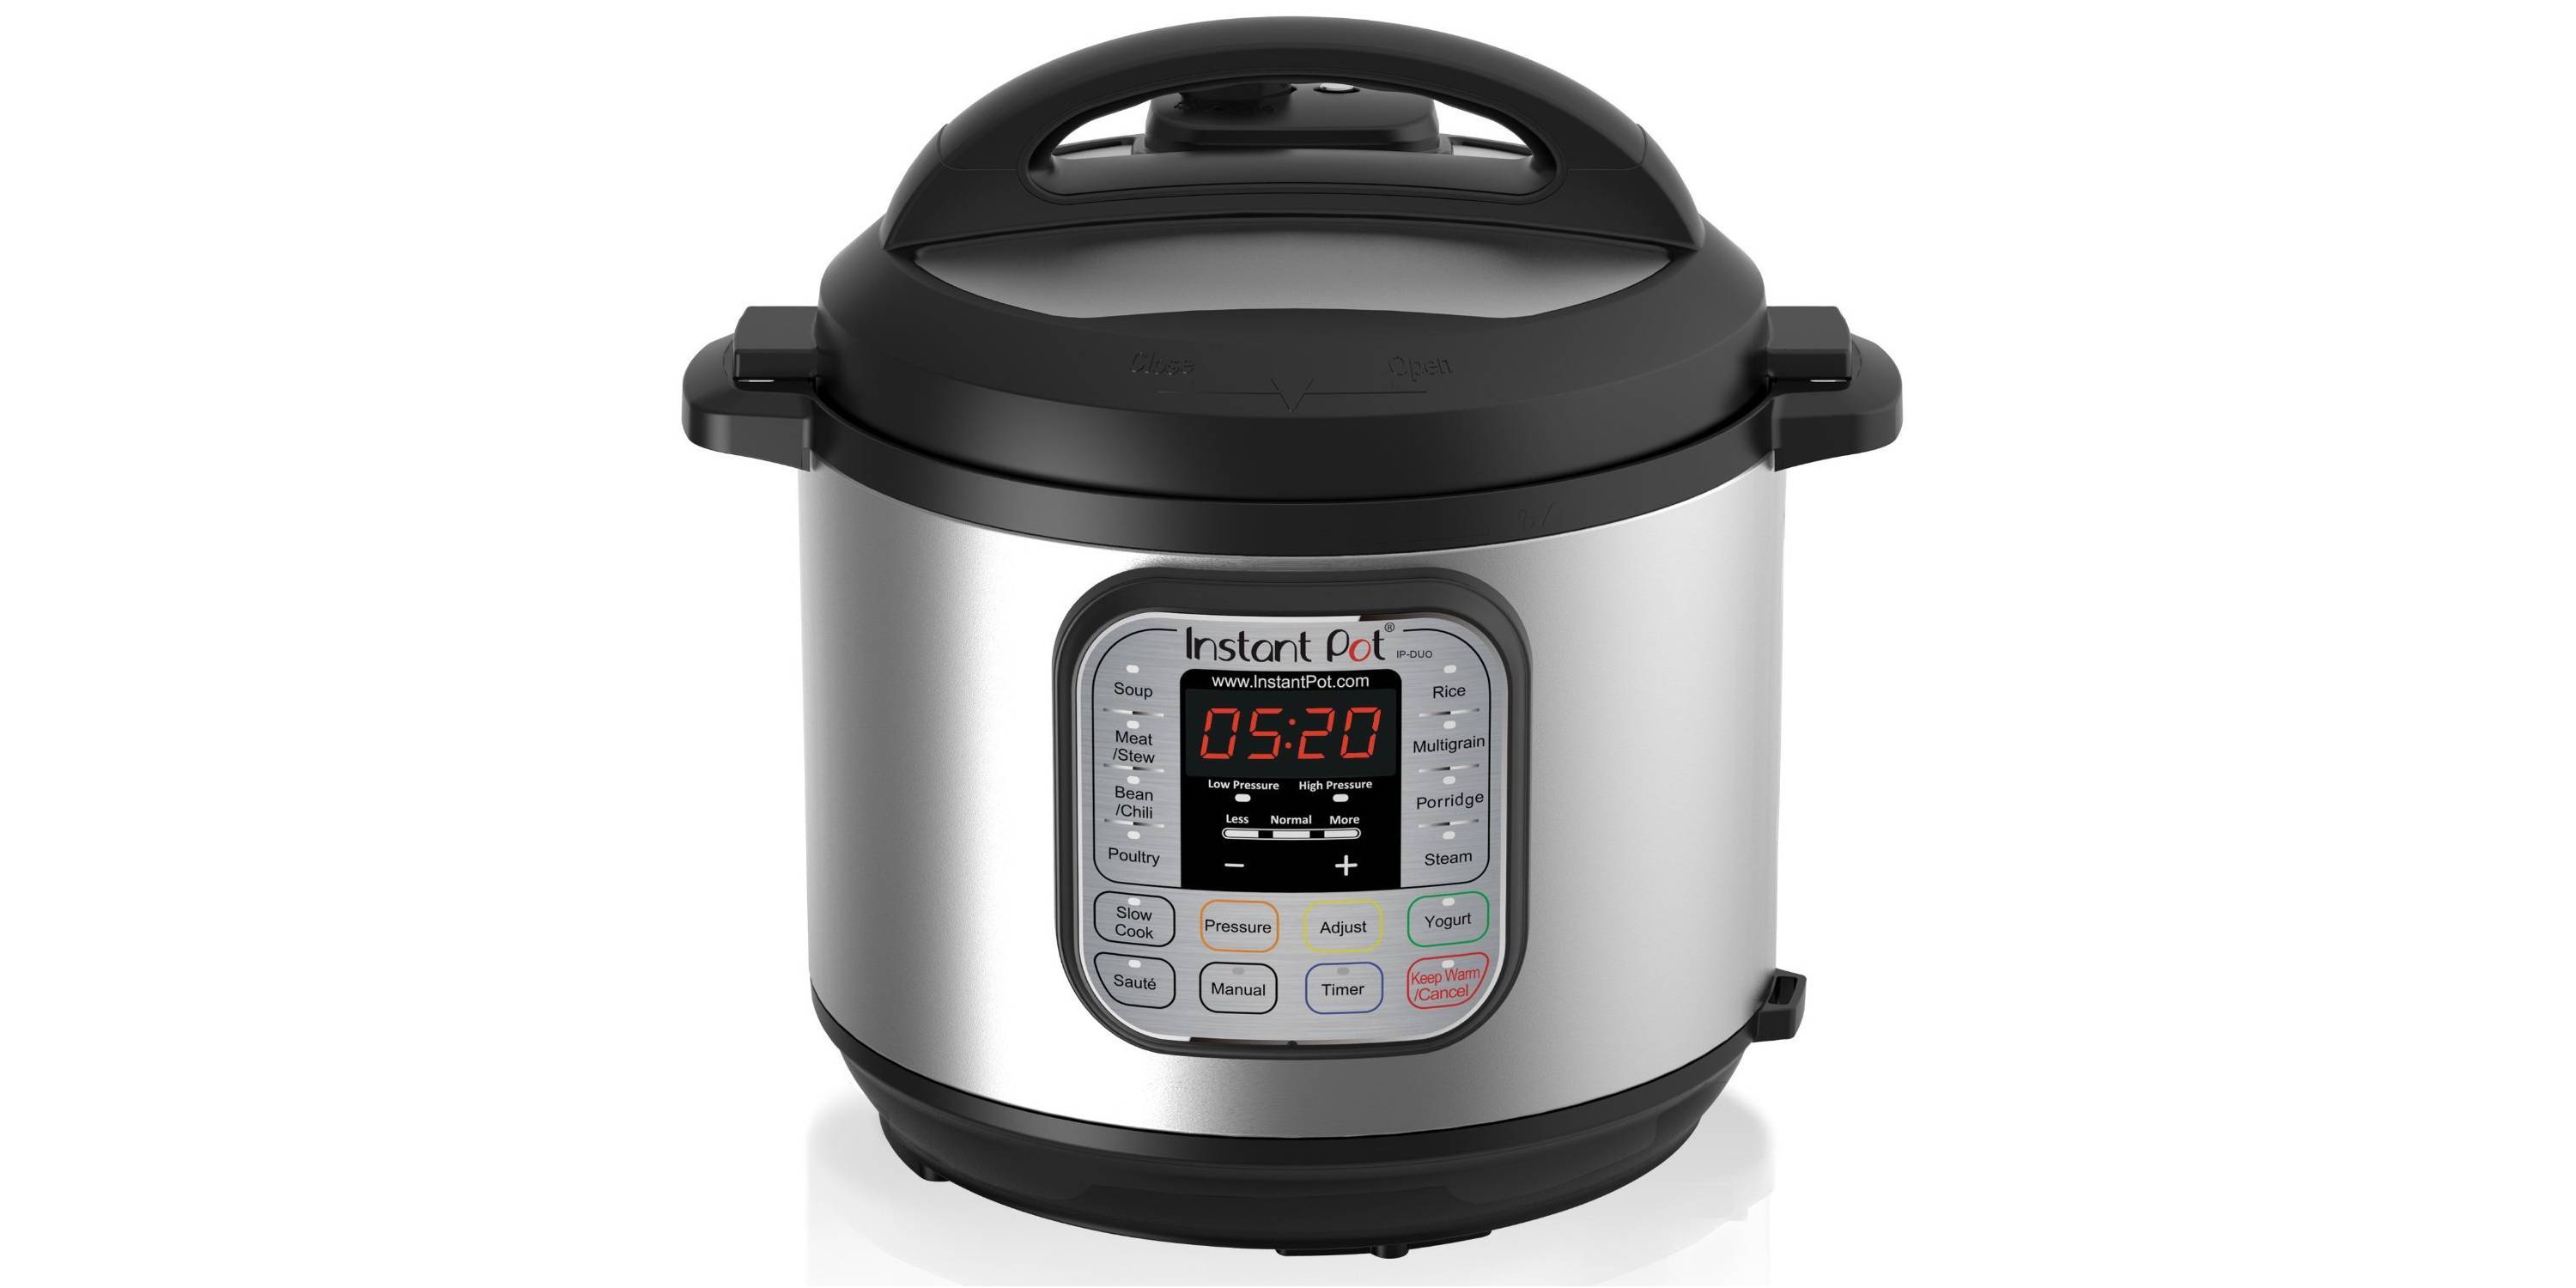 Expires today! Instant Pot 7-in-1 pressure cooker for $75, free shipping